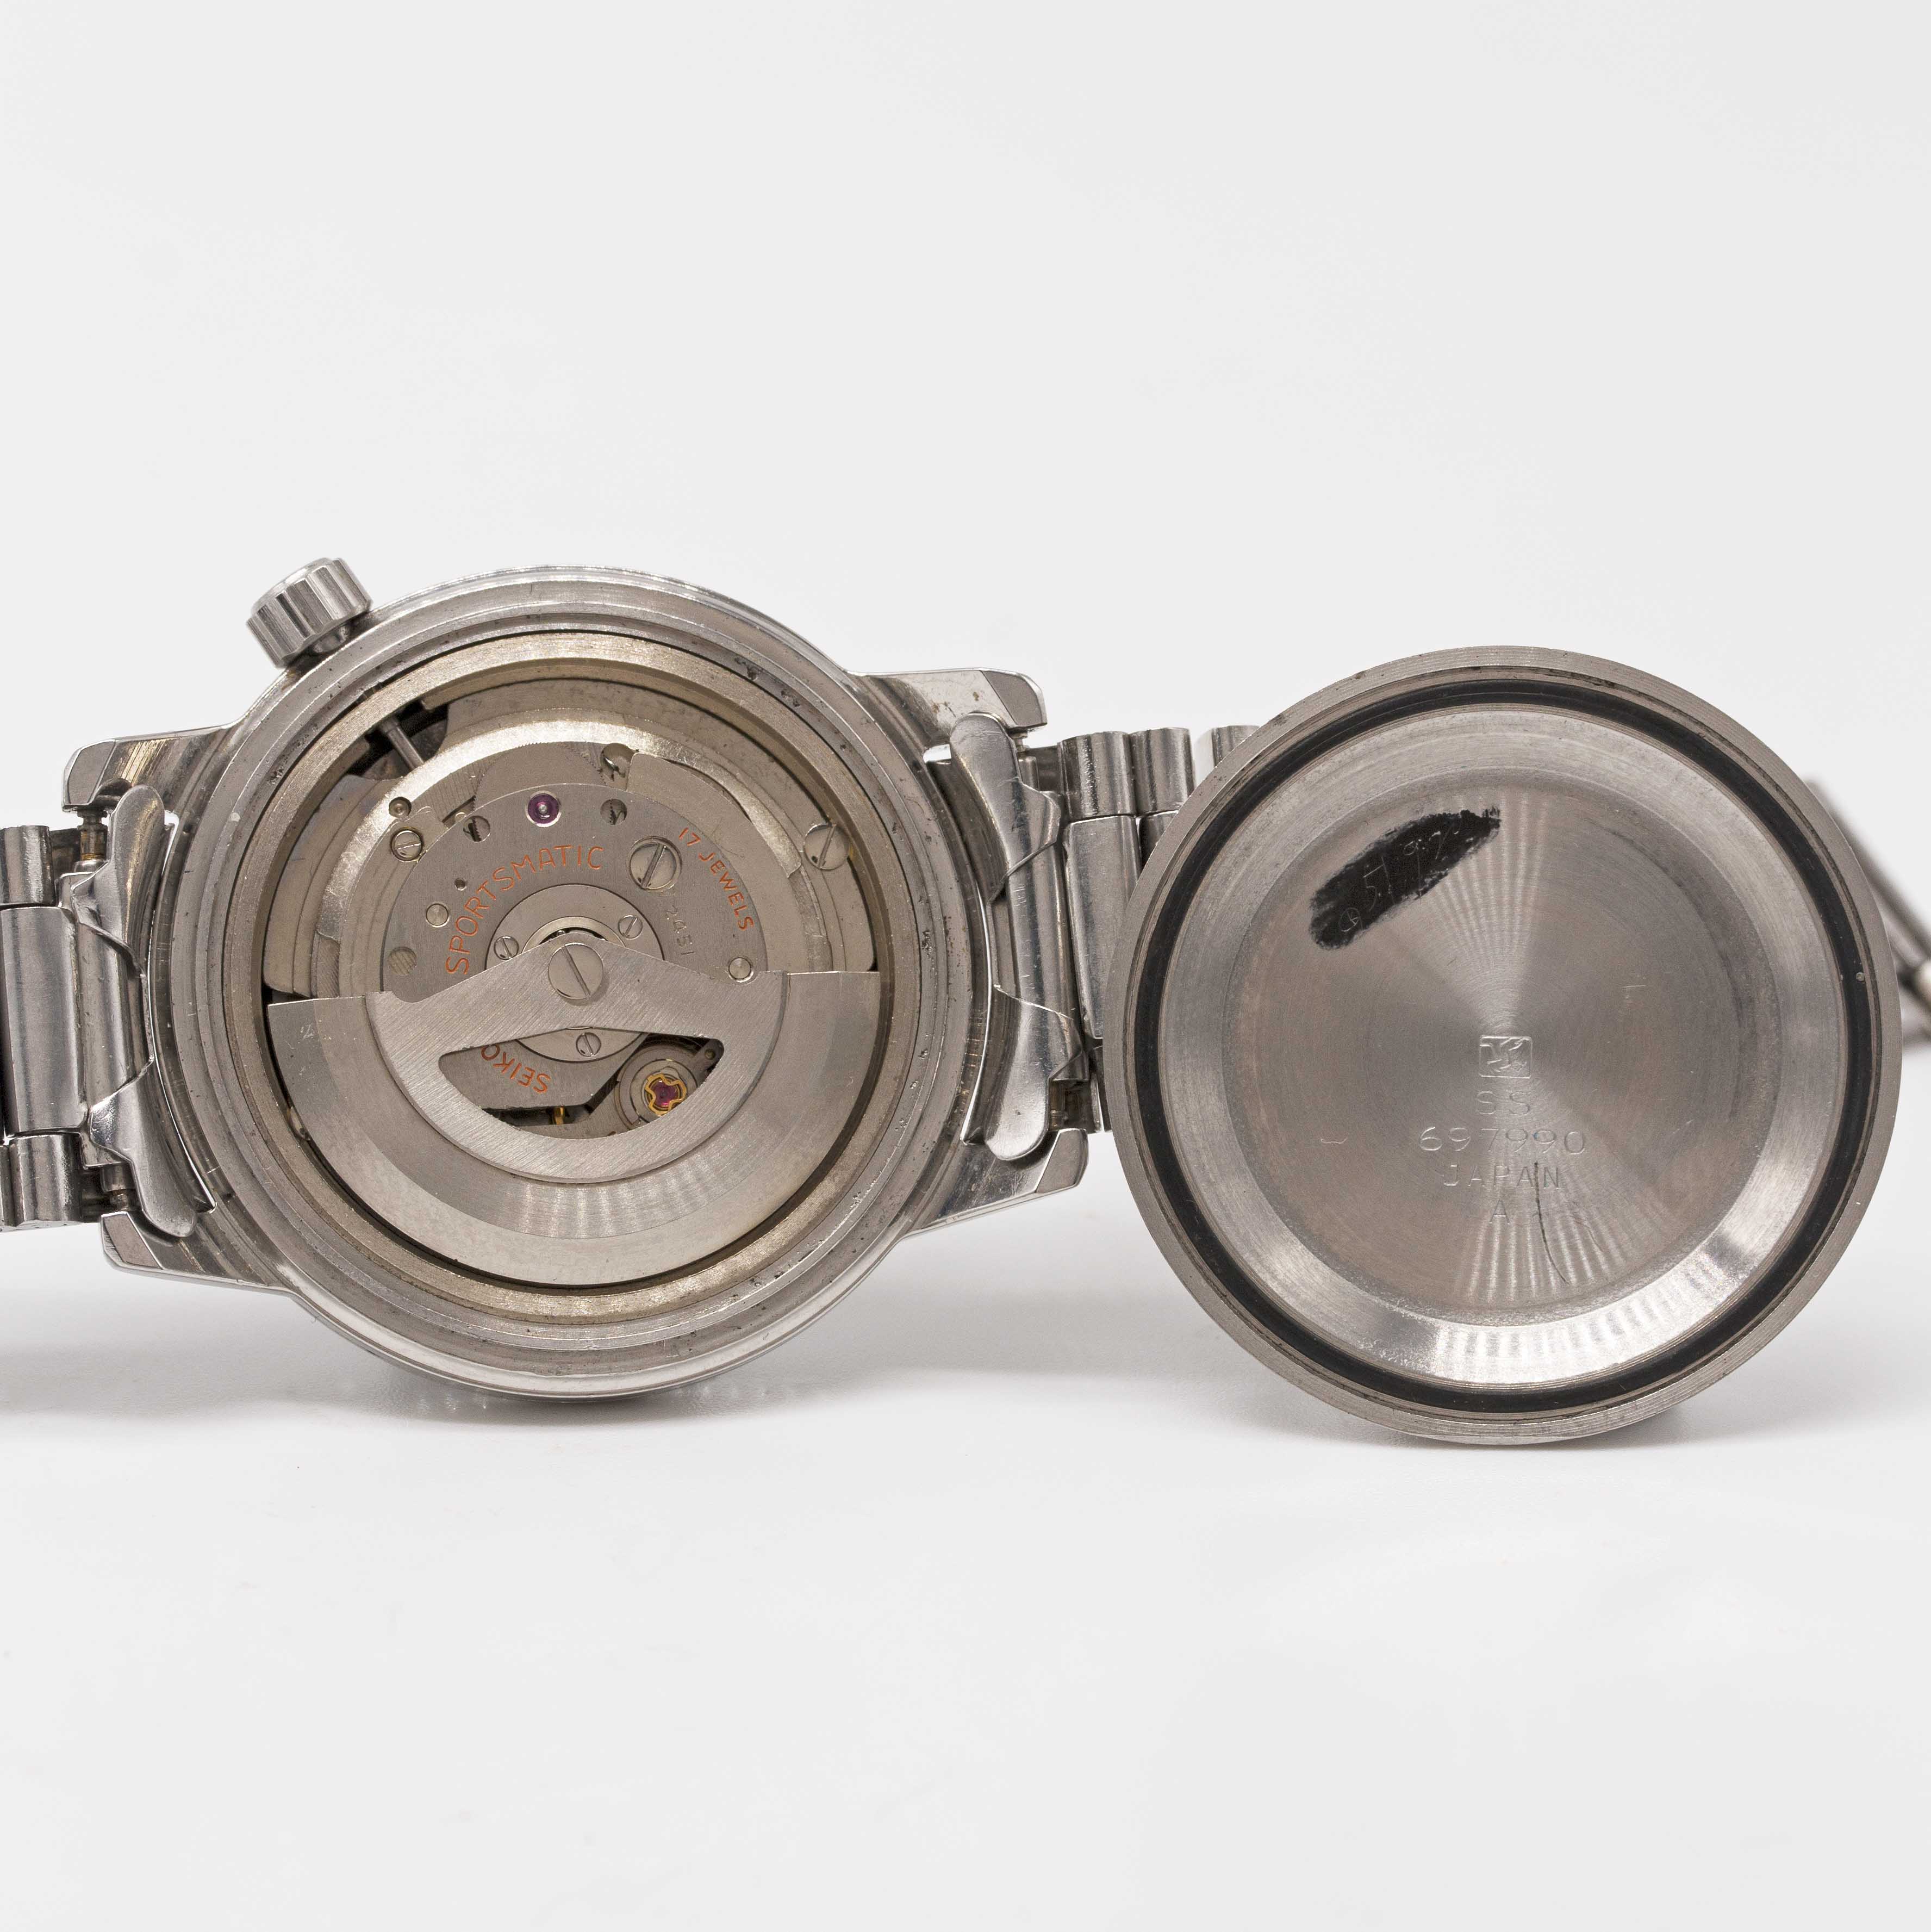 A GENTLEMAN'S STAINLESS STEEL SEIKO SPORTSMATIC SILVERWAVE AUTOMATIC DIVERS BRACELET WATCH CIRCA - Image 7 of 7